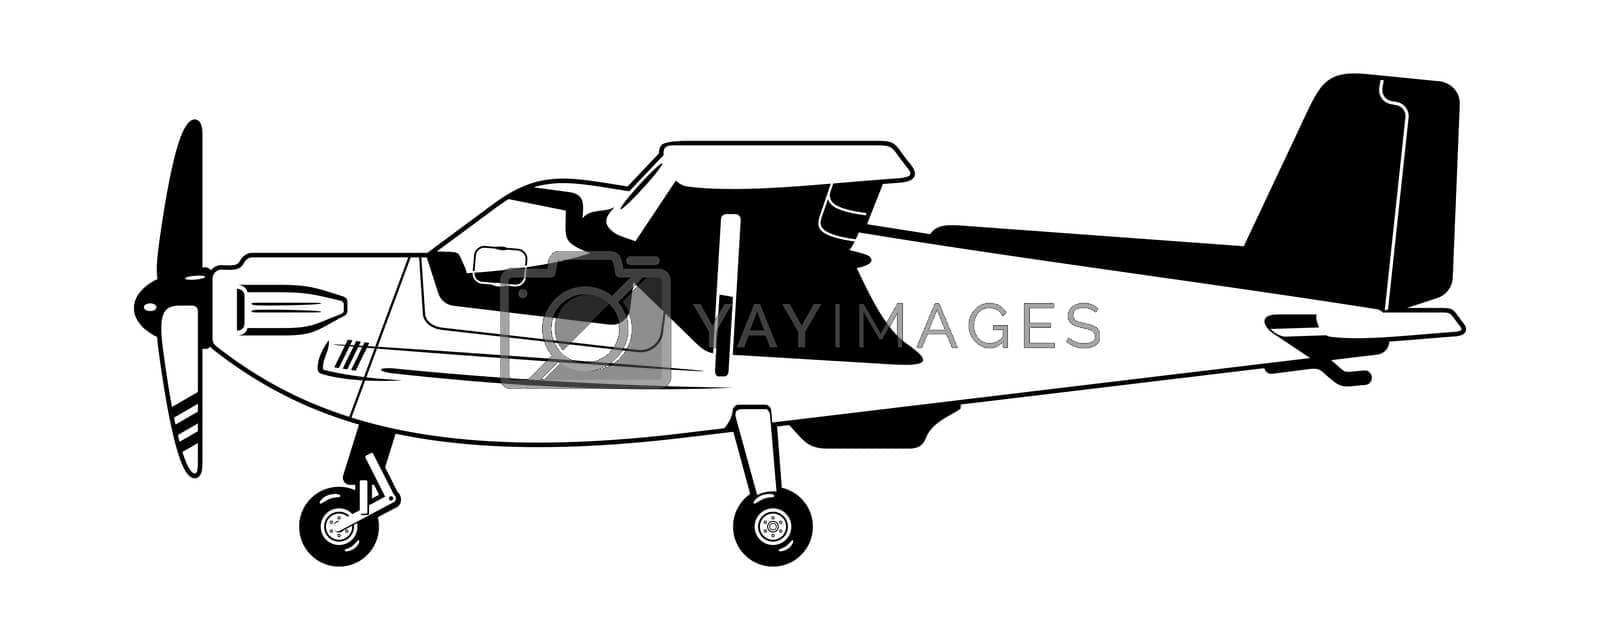 Royalty free image of private aircraft by Suricoma